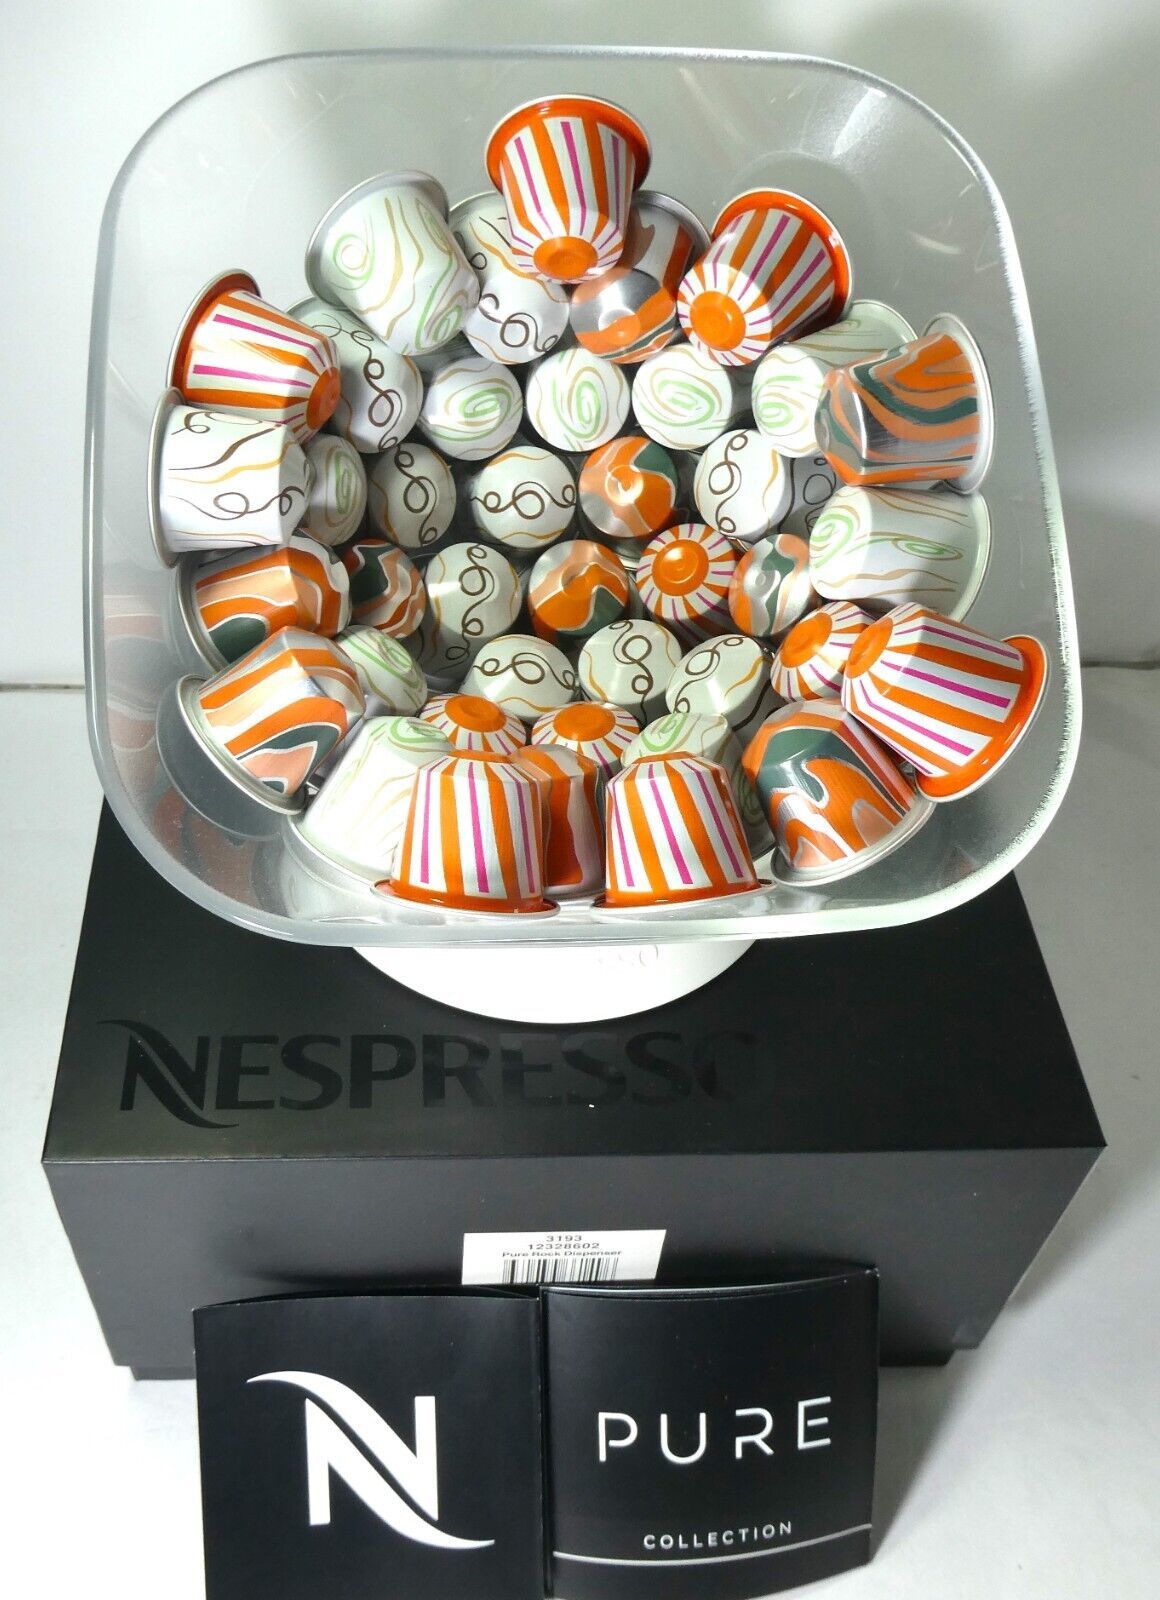 OFFER !! Nespresso PURE ROCK DISPENSER New & 40 LIMITED Coffee Capsules,Read - $335.00